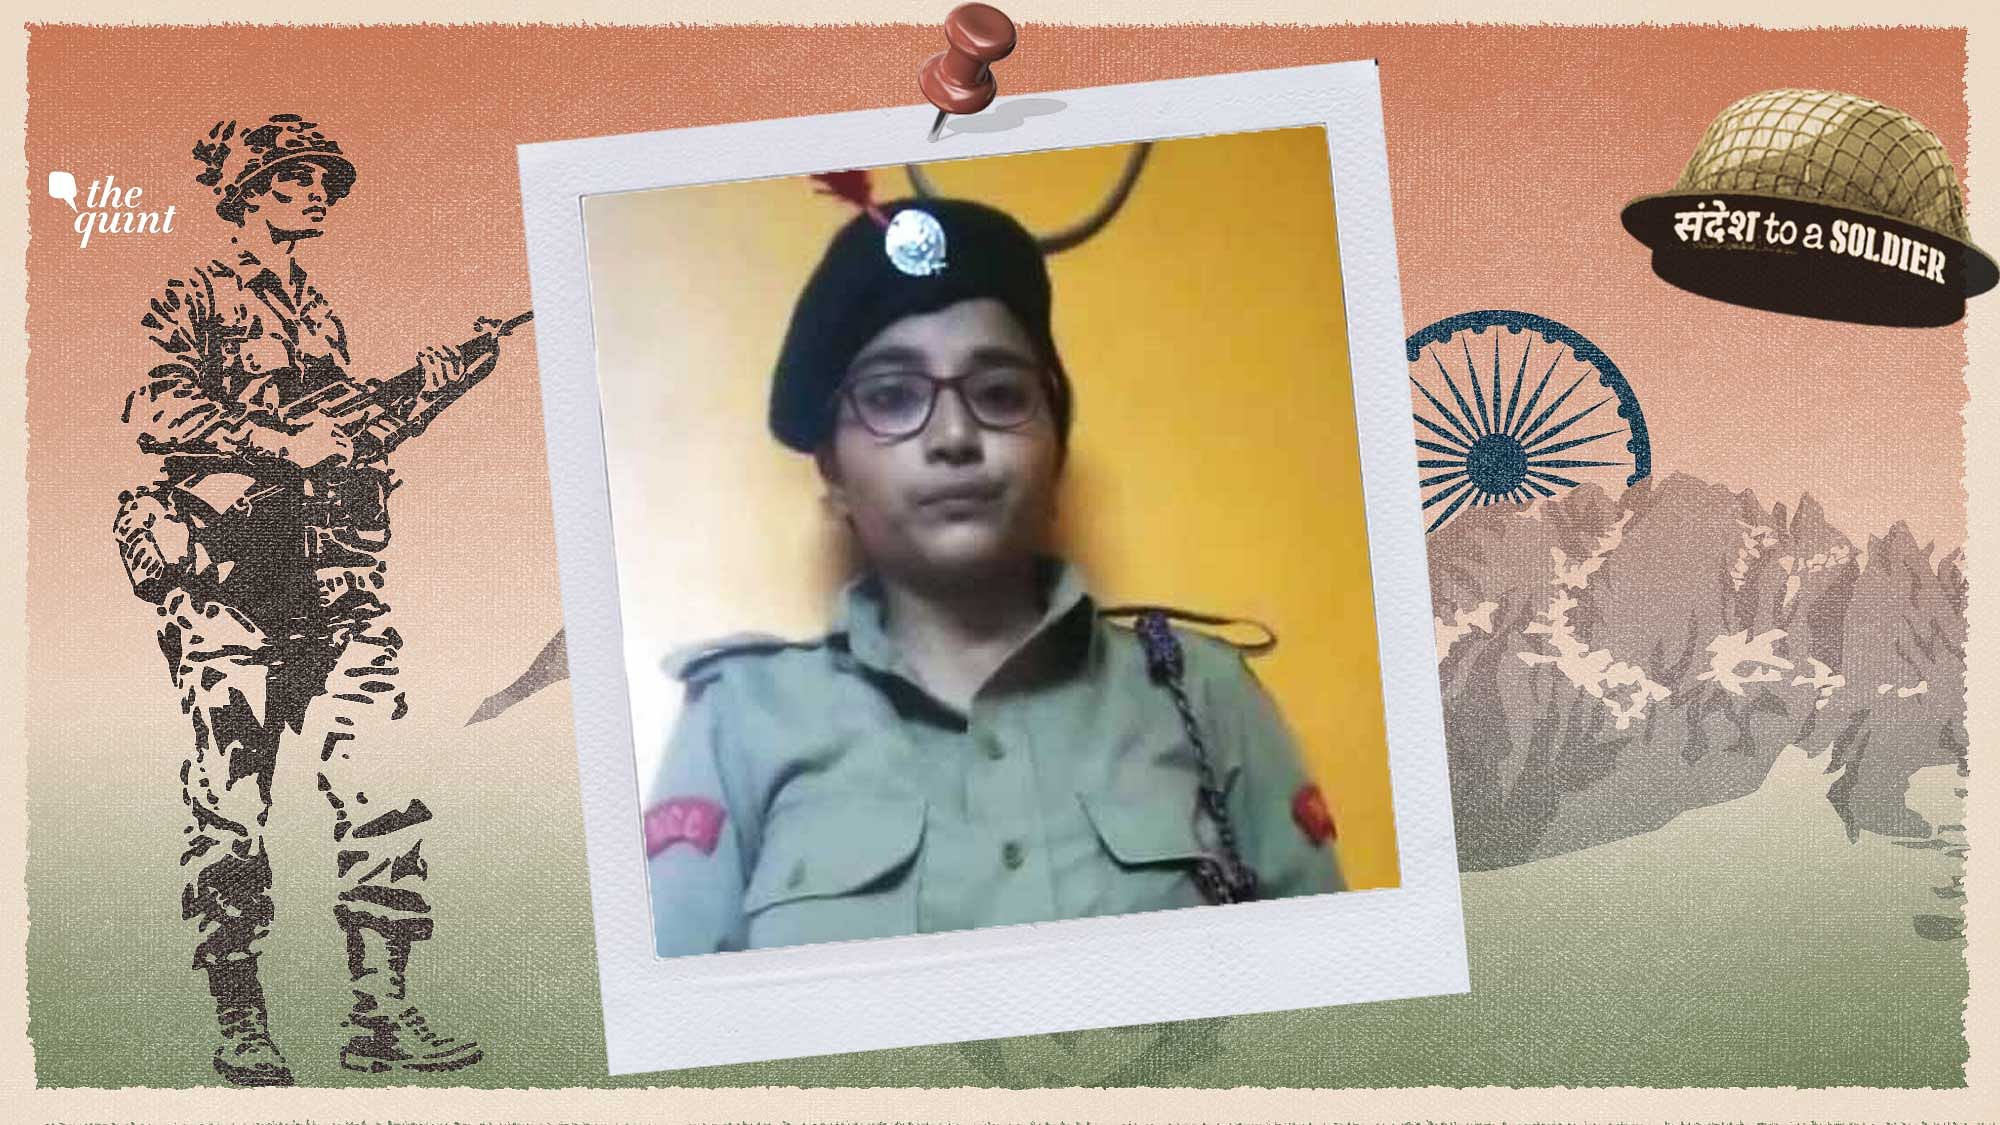 Krishna Sodha from Ahmedabad shares her Sandesh to a Soldier.